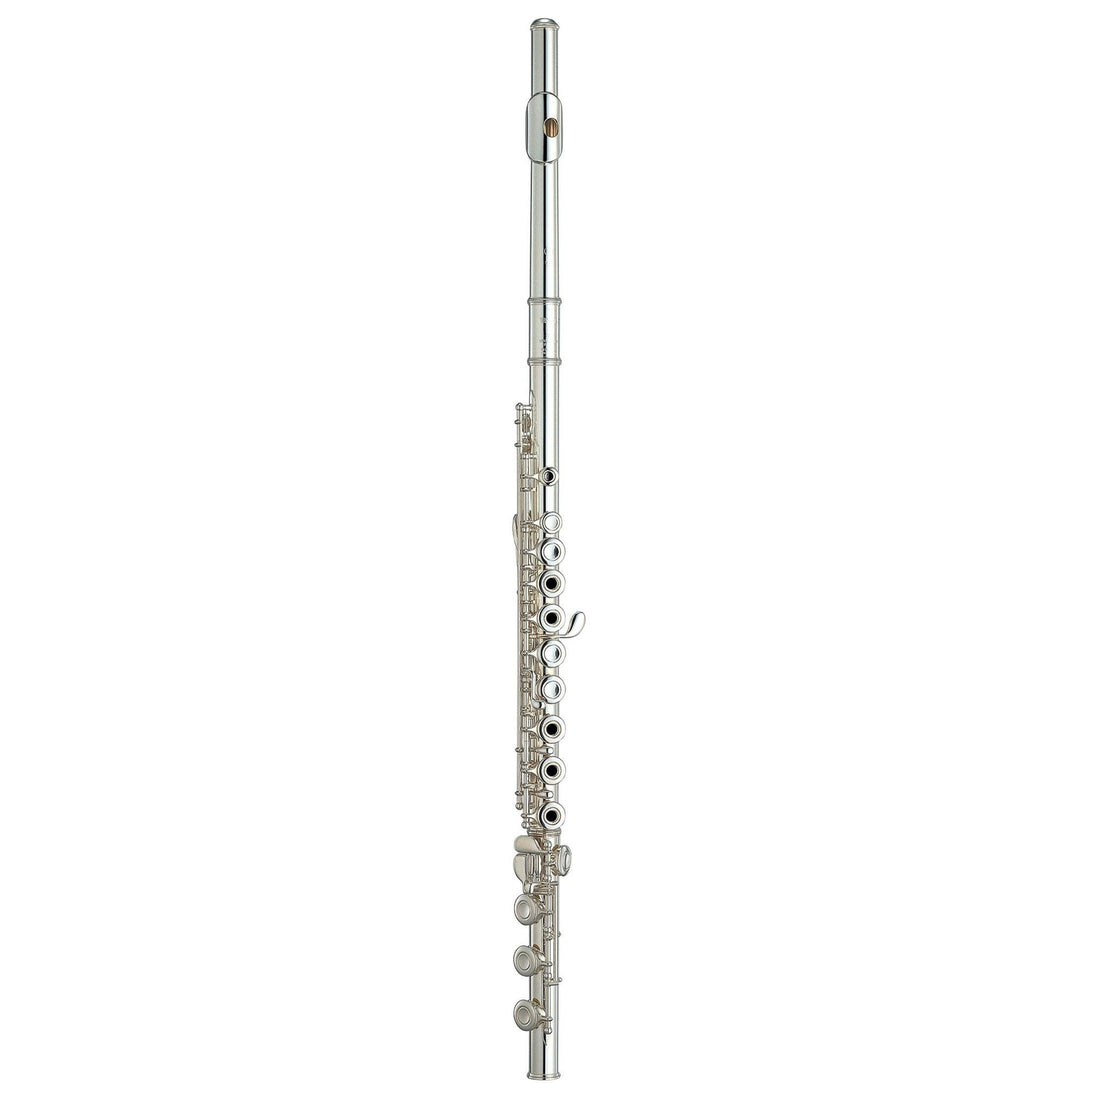 Yamaha YFL-482 Intermediate Series Flute YFL-482H - Includes B-Footjoint with Gizmo Key and FLC-48II case and FLB-400EH Cover